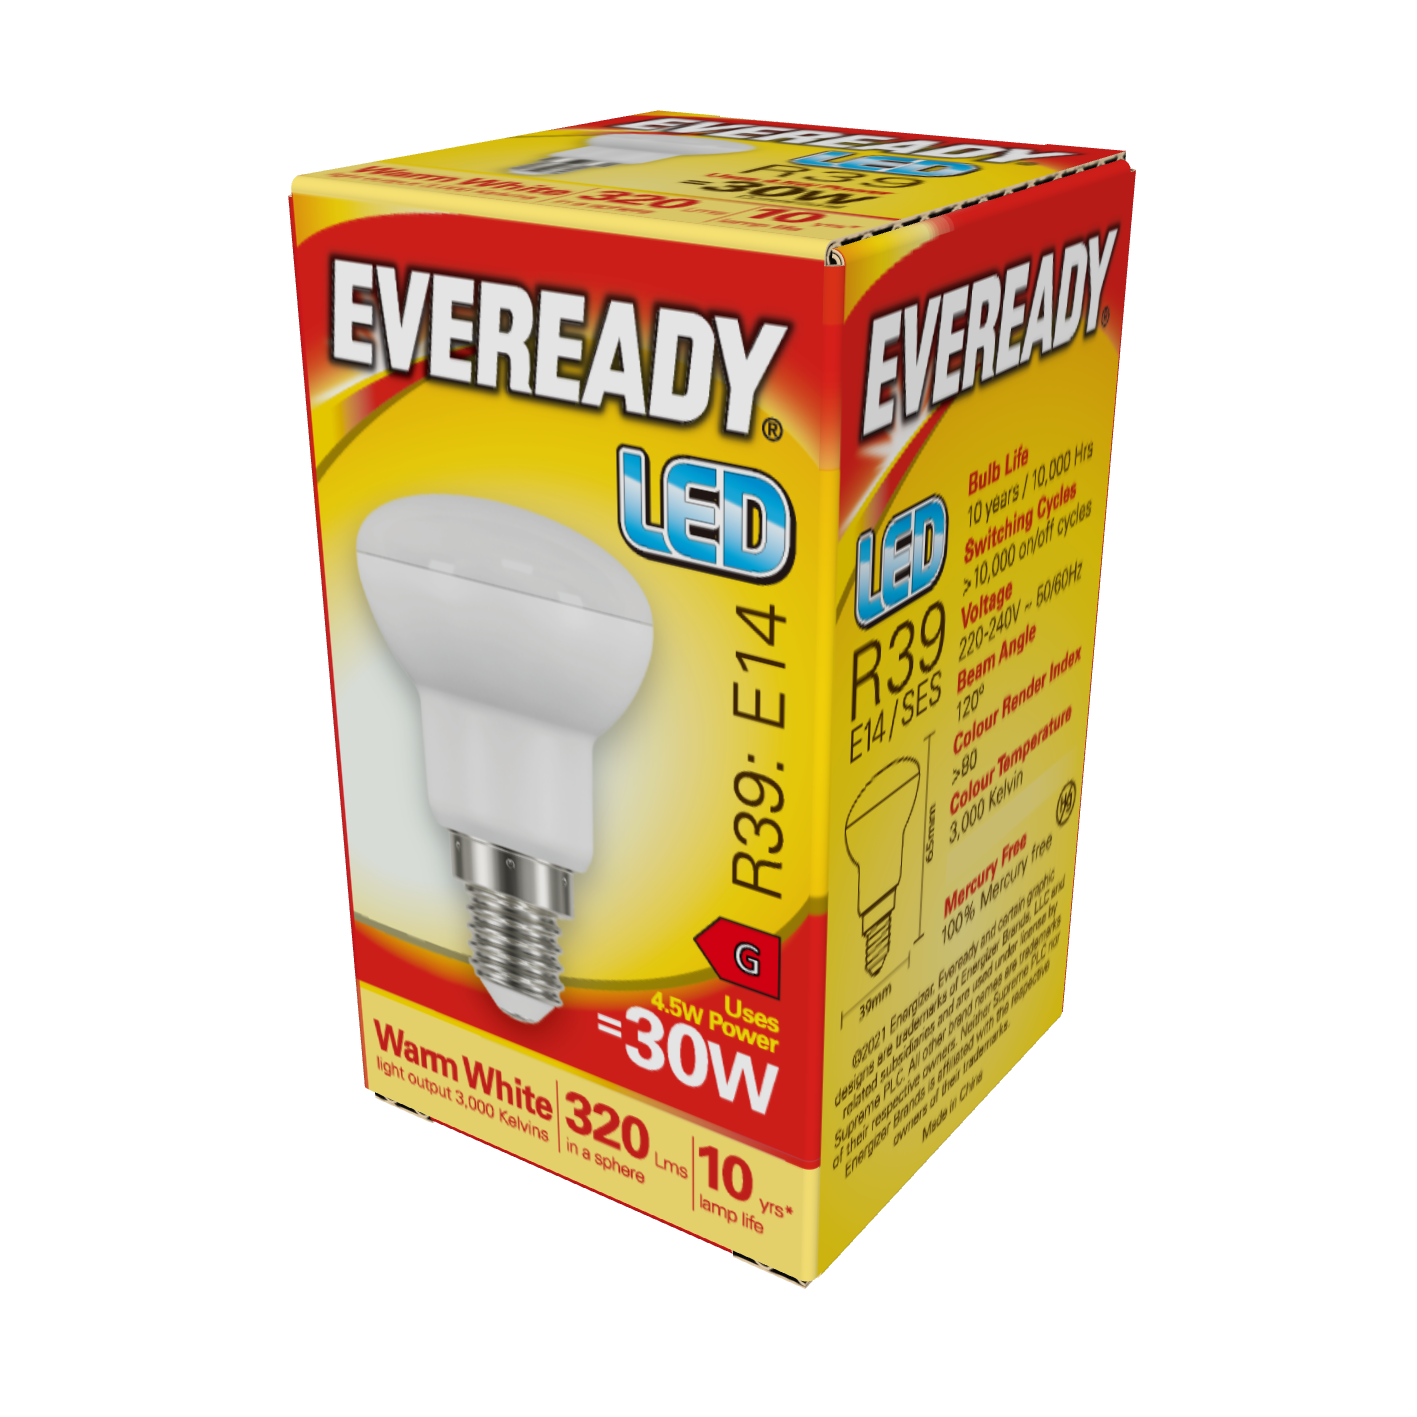 Eveready LED R39 Reflector E14 (SES) 320lm 4.5W 3,000K (Warm White), Box of 1